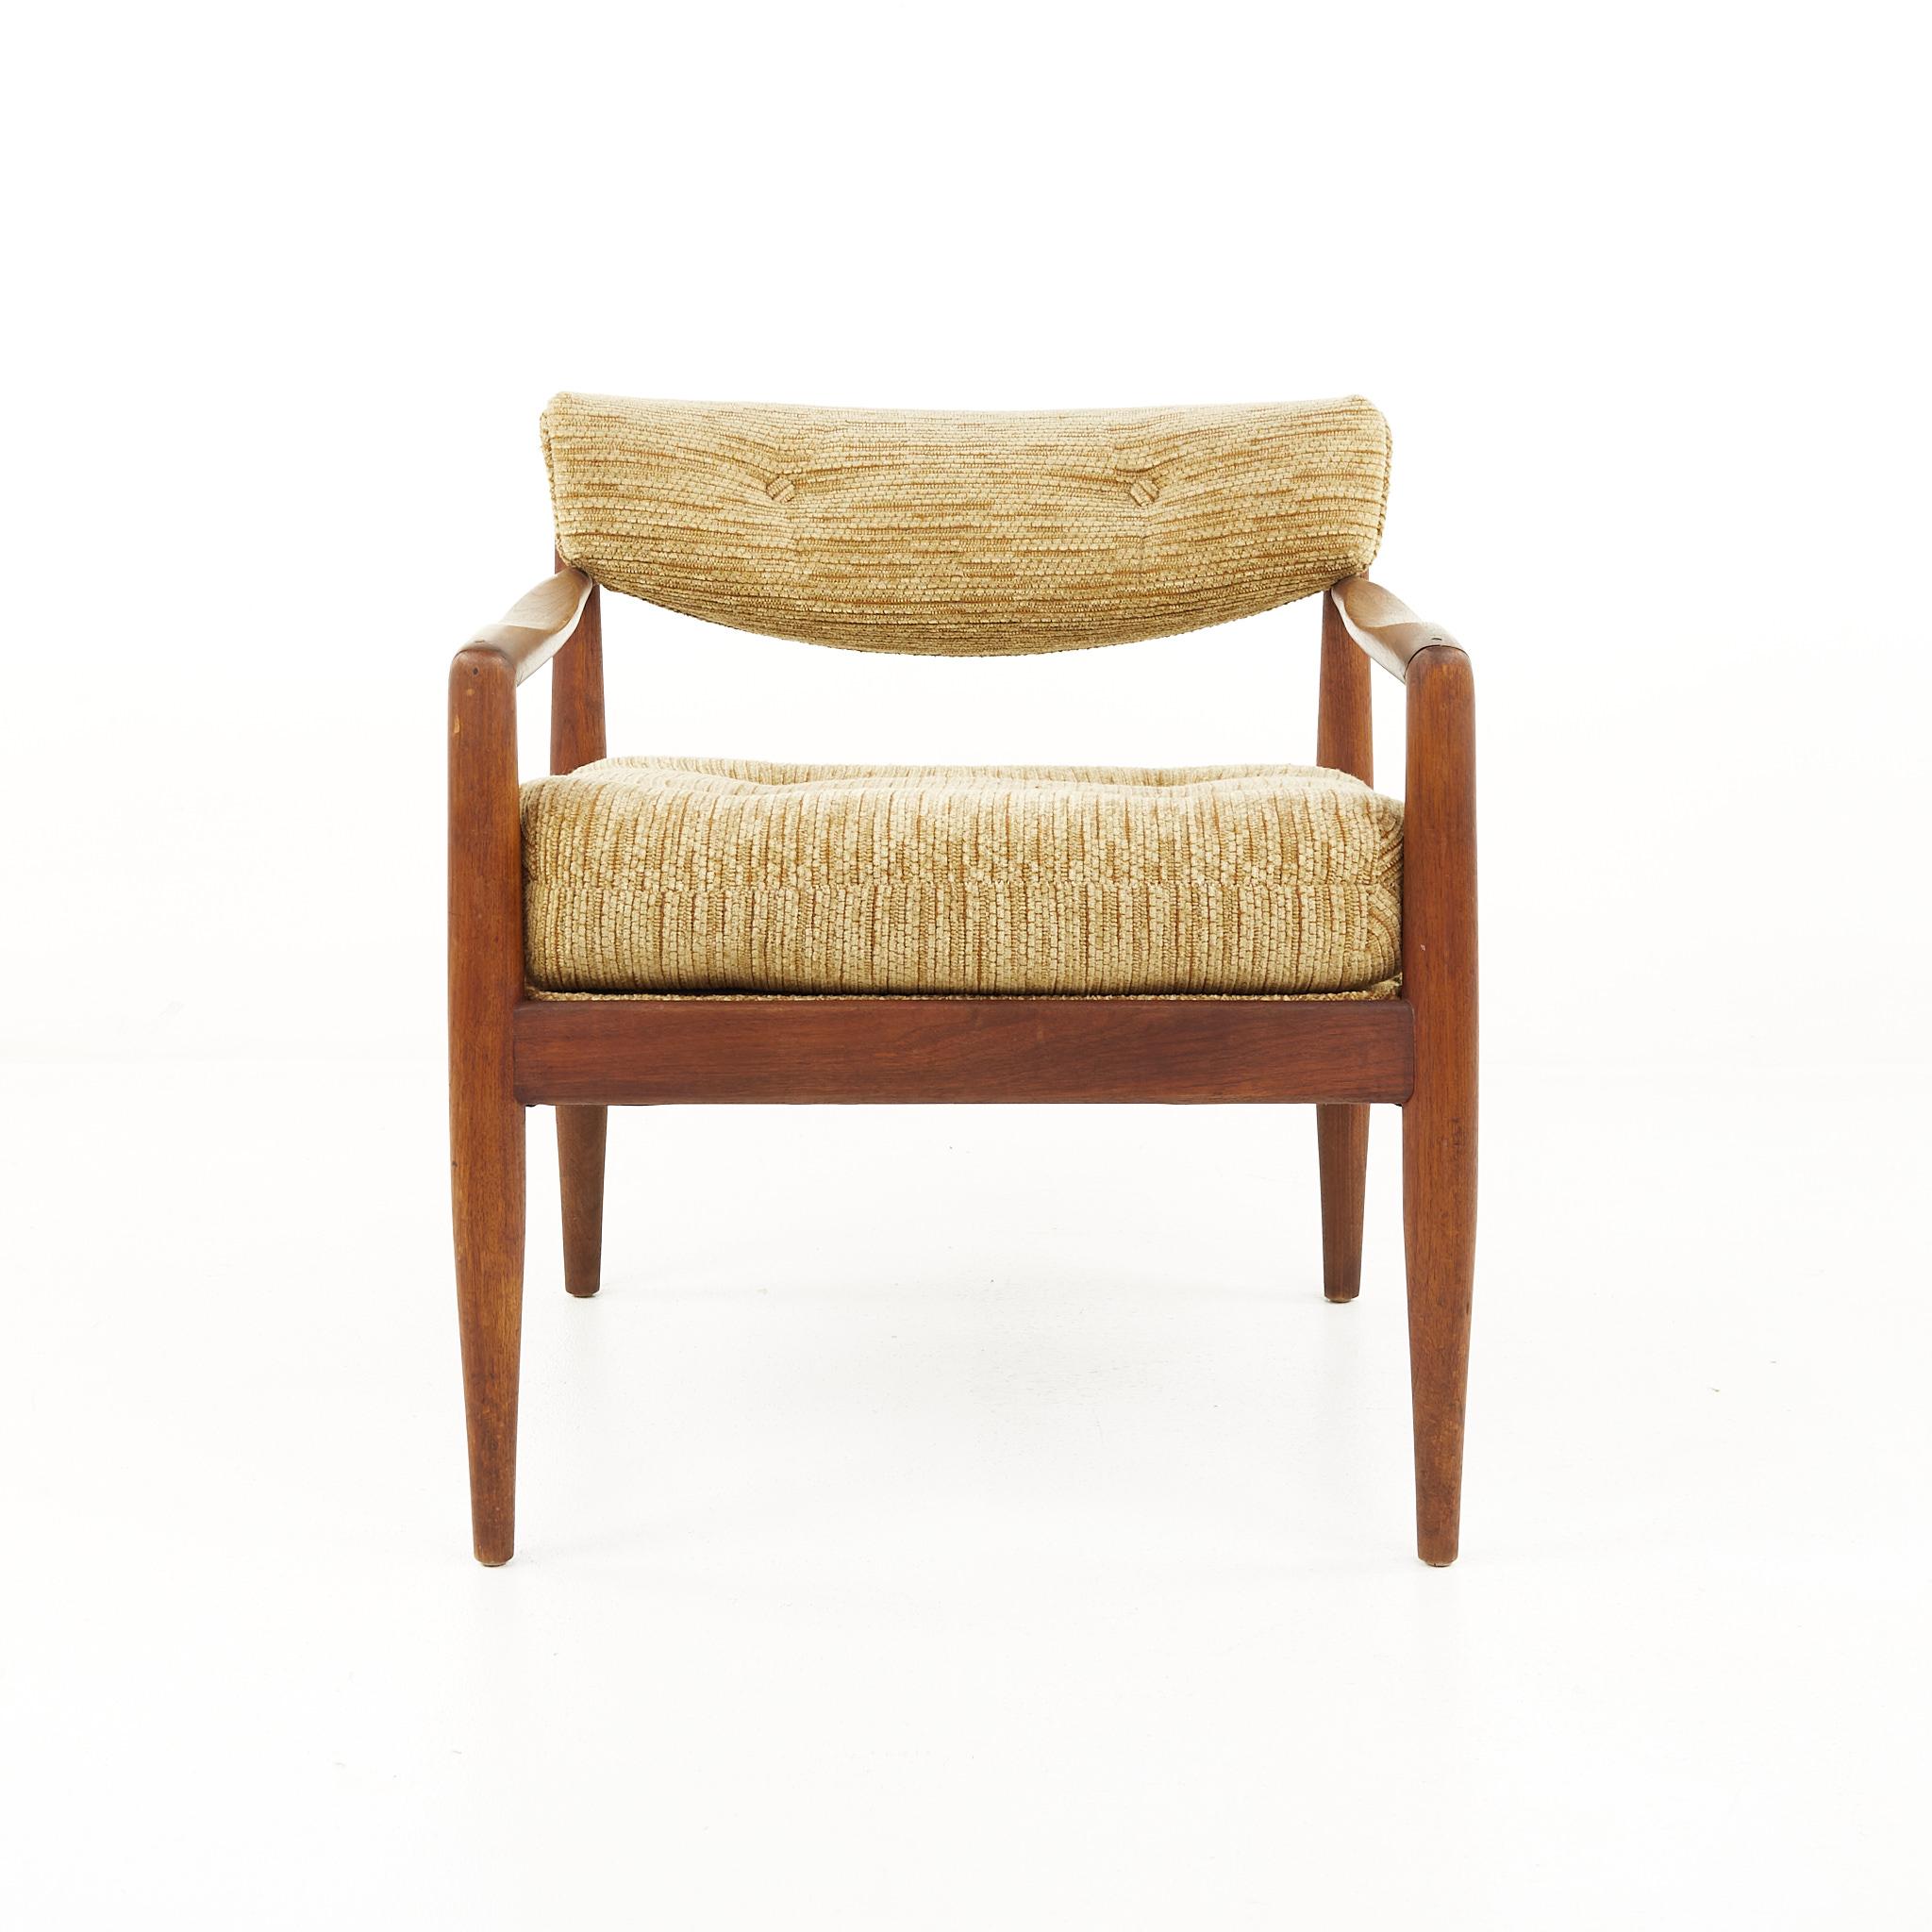 Adrian Pearsall for Craft Associates lounge chair

This chair measures: 24.25 wide x 23.5 deep x 25.75 inches high, with a seat height of 17.5 and arm height of 21.5 inches

All pieces of furniture can be had in what we call restored vintage